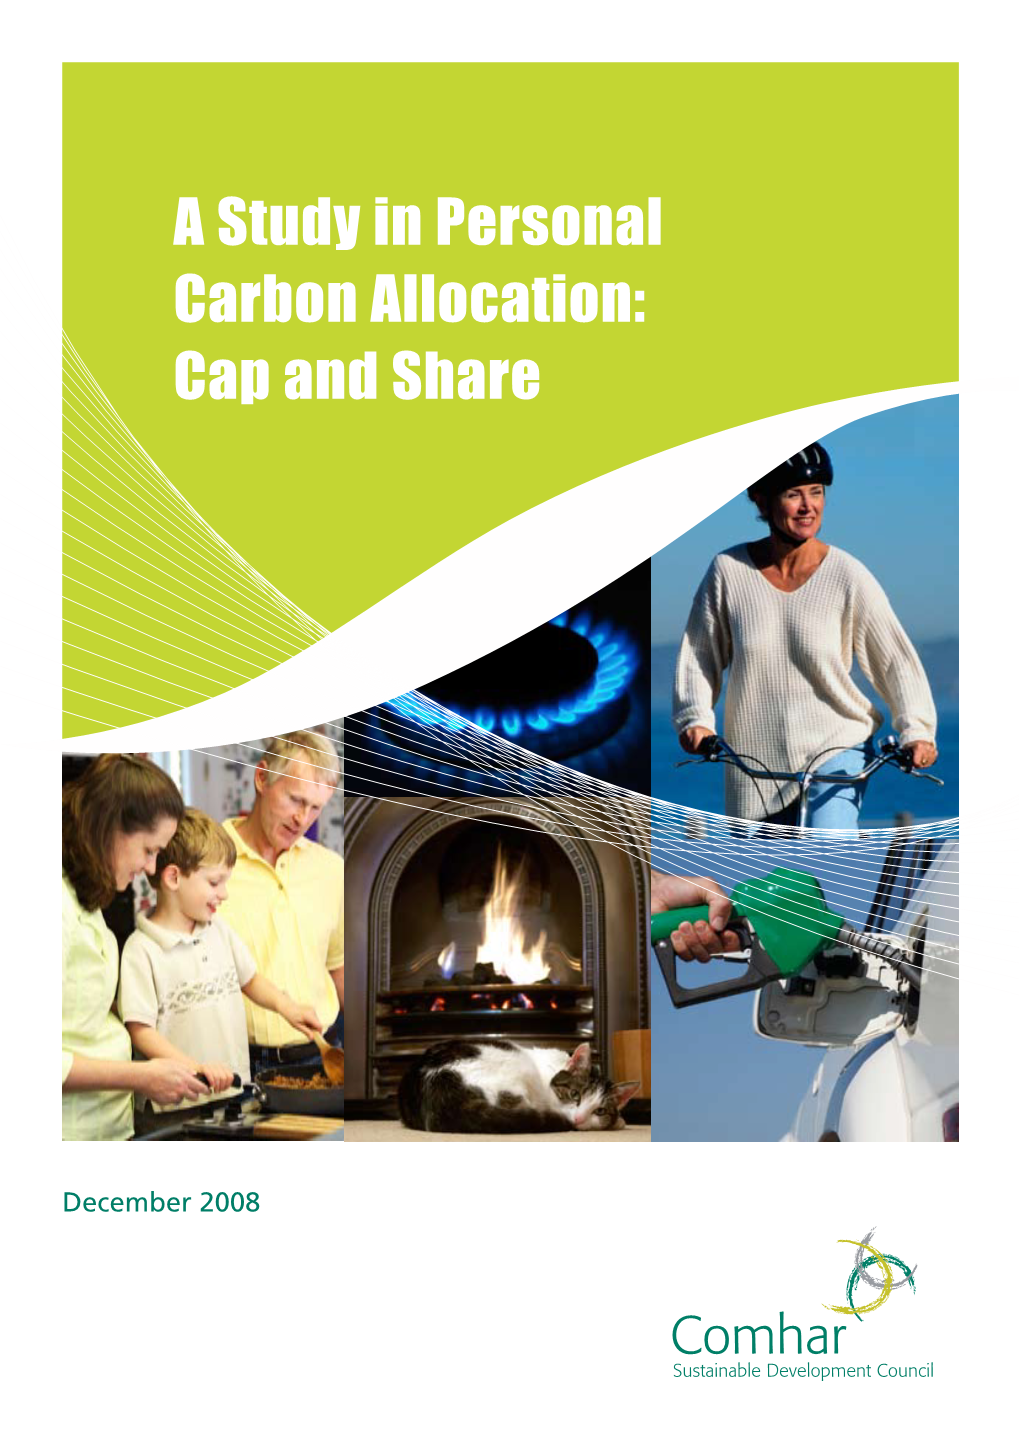 A Study in Personal Carbon Allocation: Cap and Share